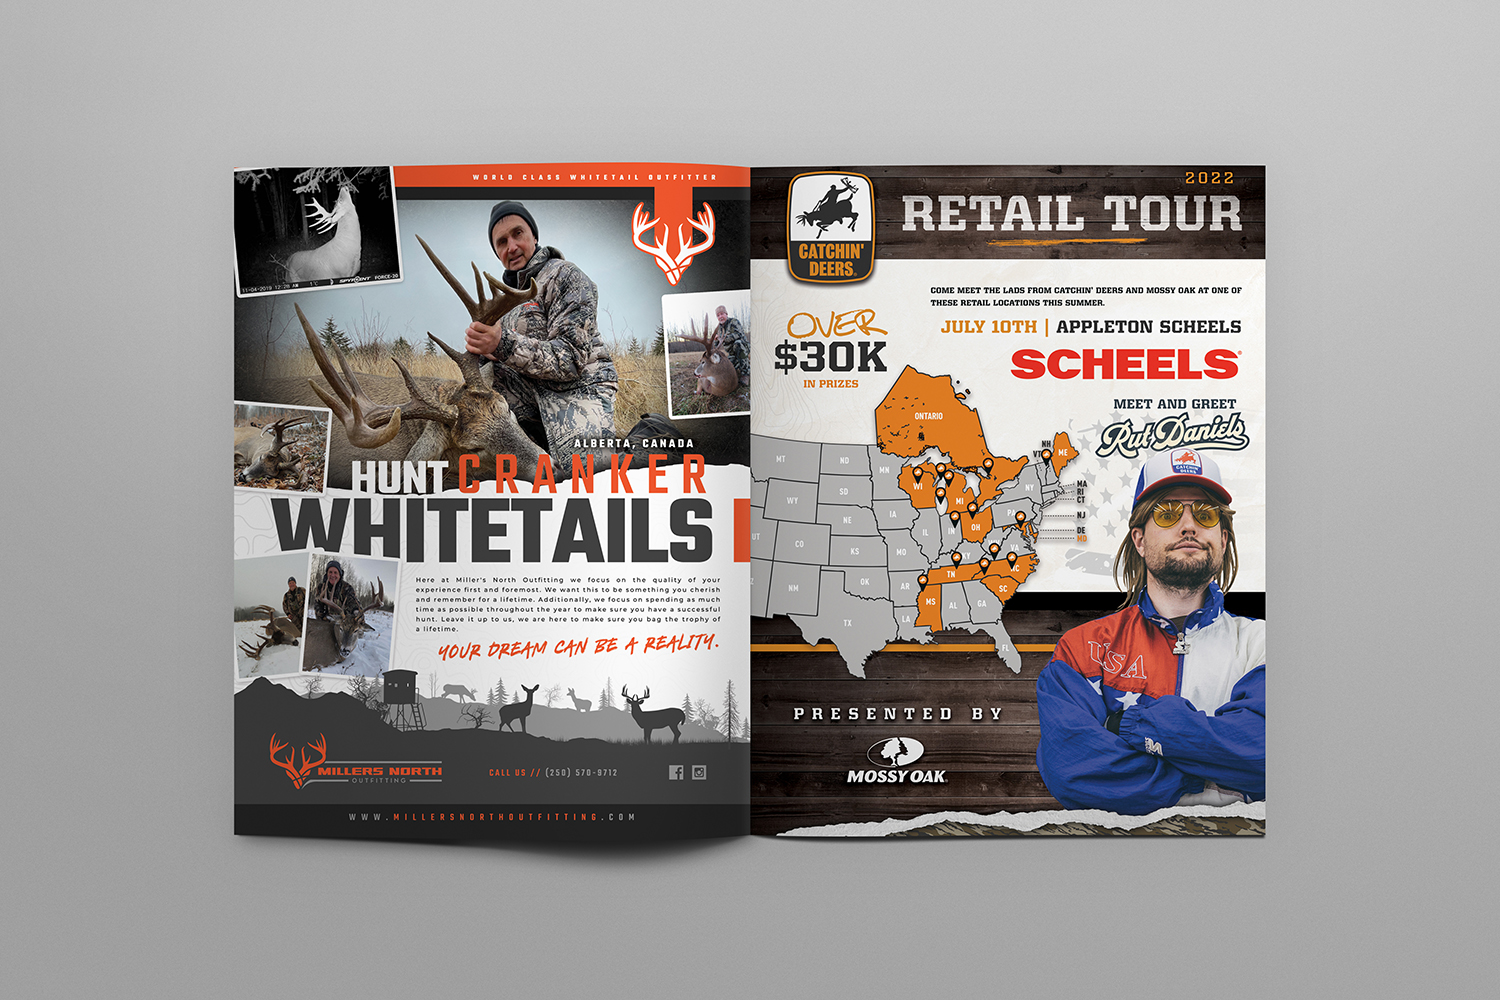 Millers North Alberta Whitetail Hunting Outfitter Catchin Deers Scheels Full Page Ad Designs